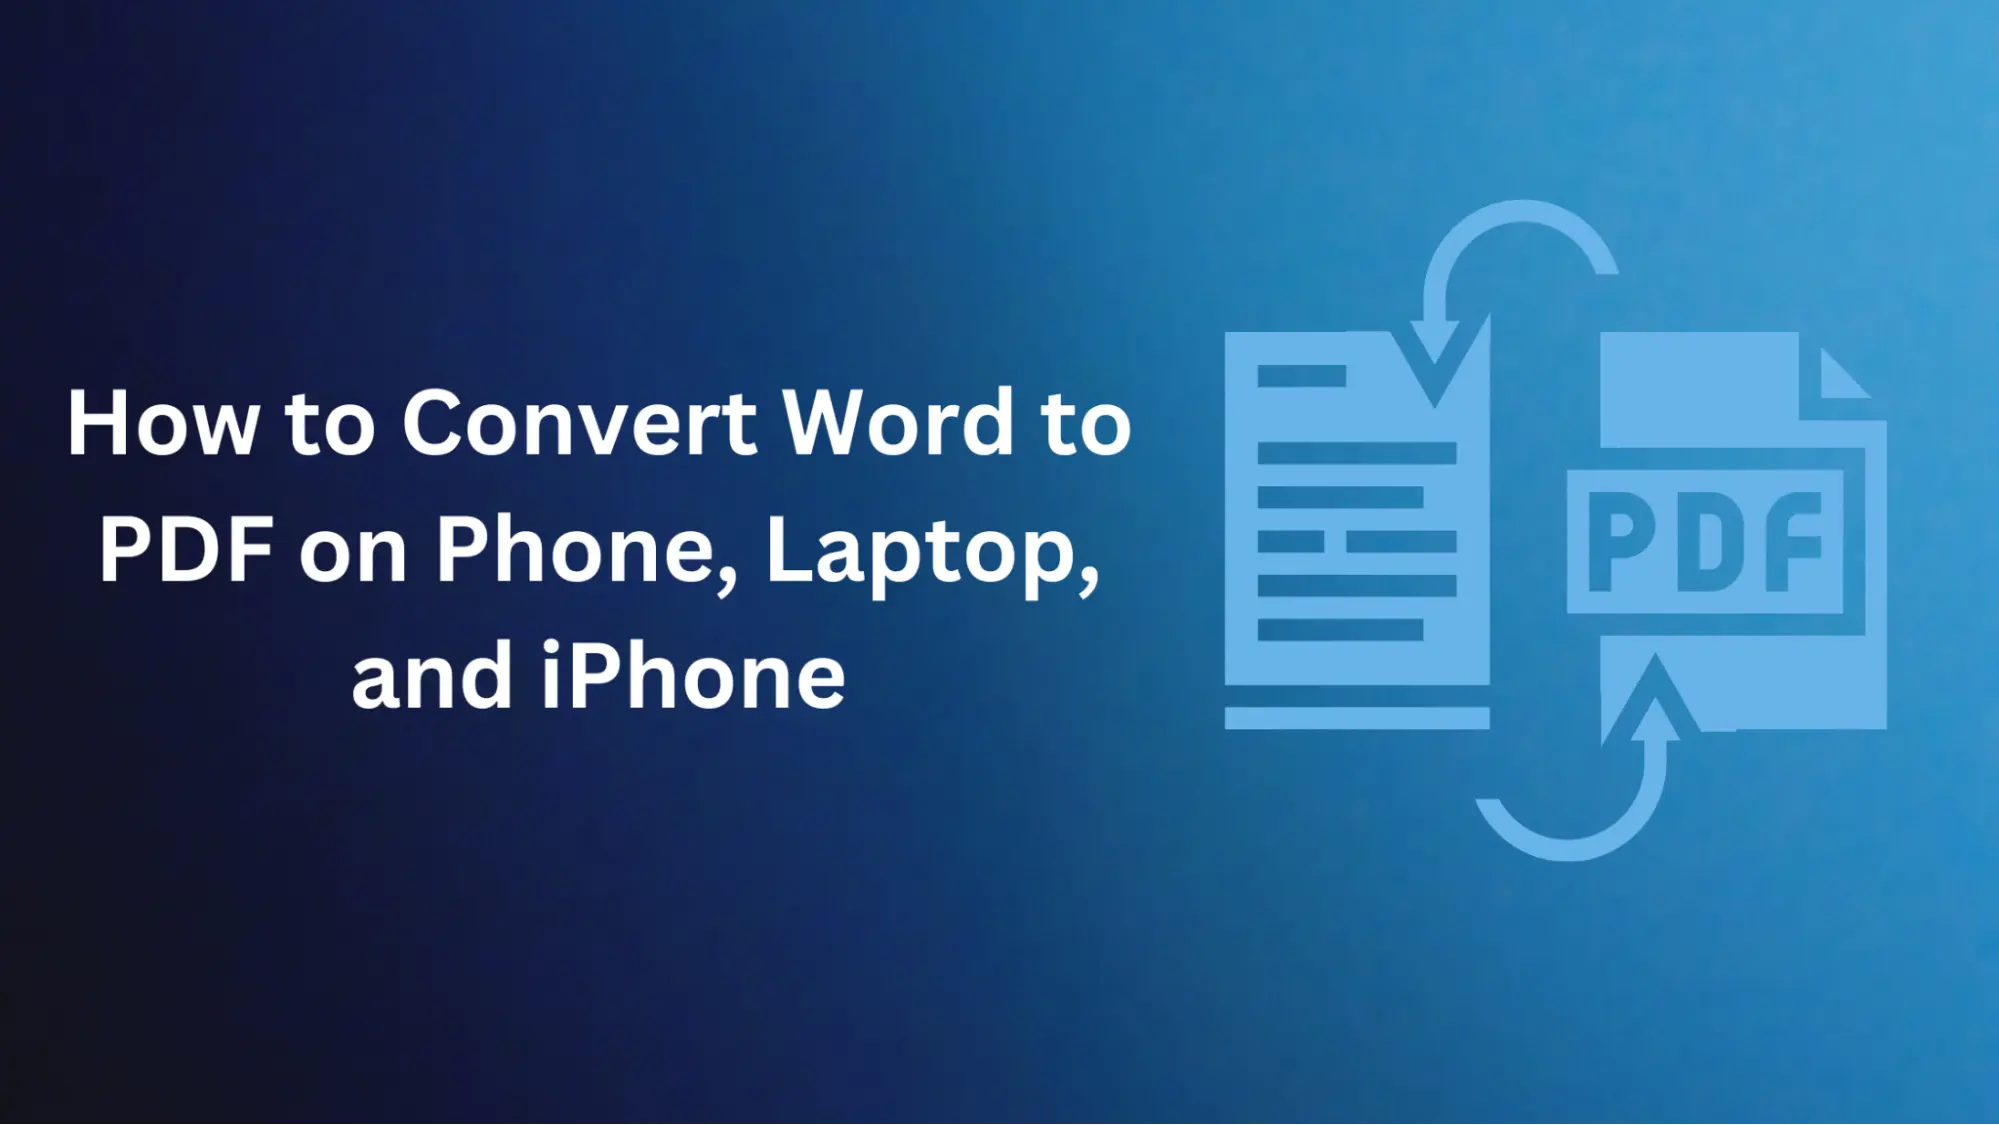 How to Convert Word to PDF on Phone, Laptop, and iPhone